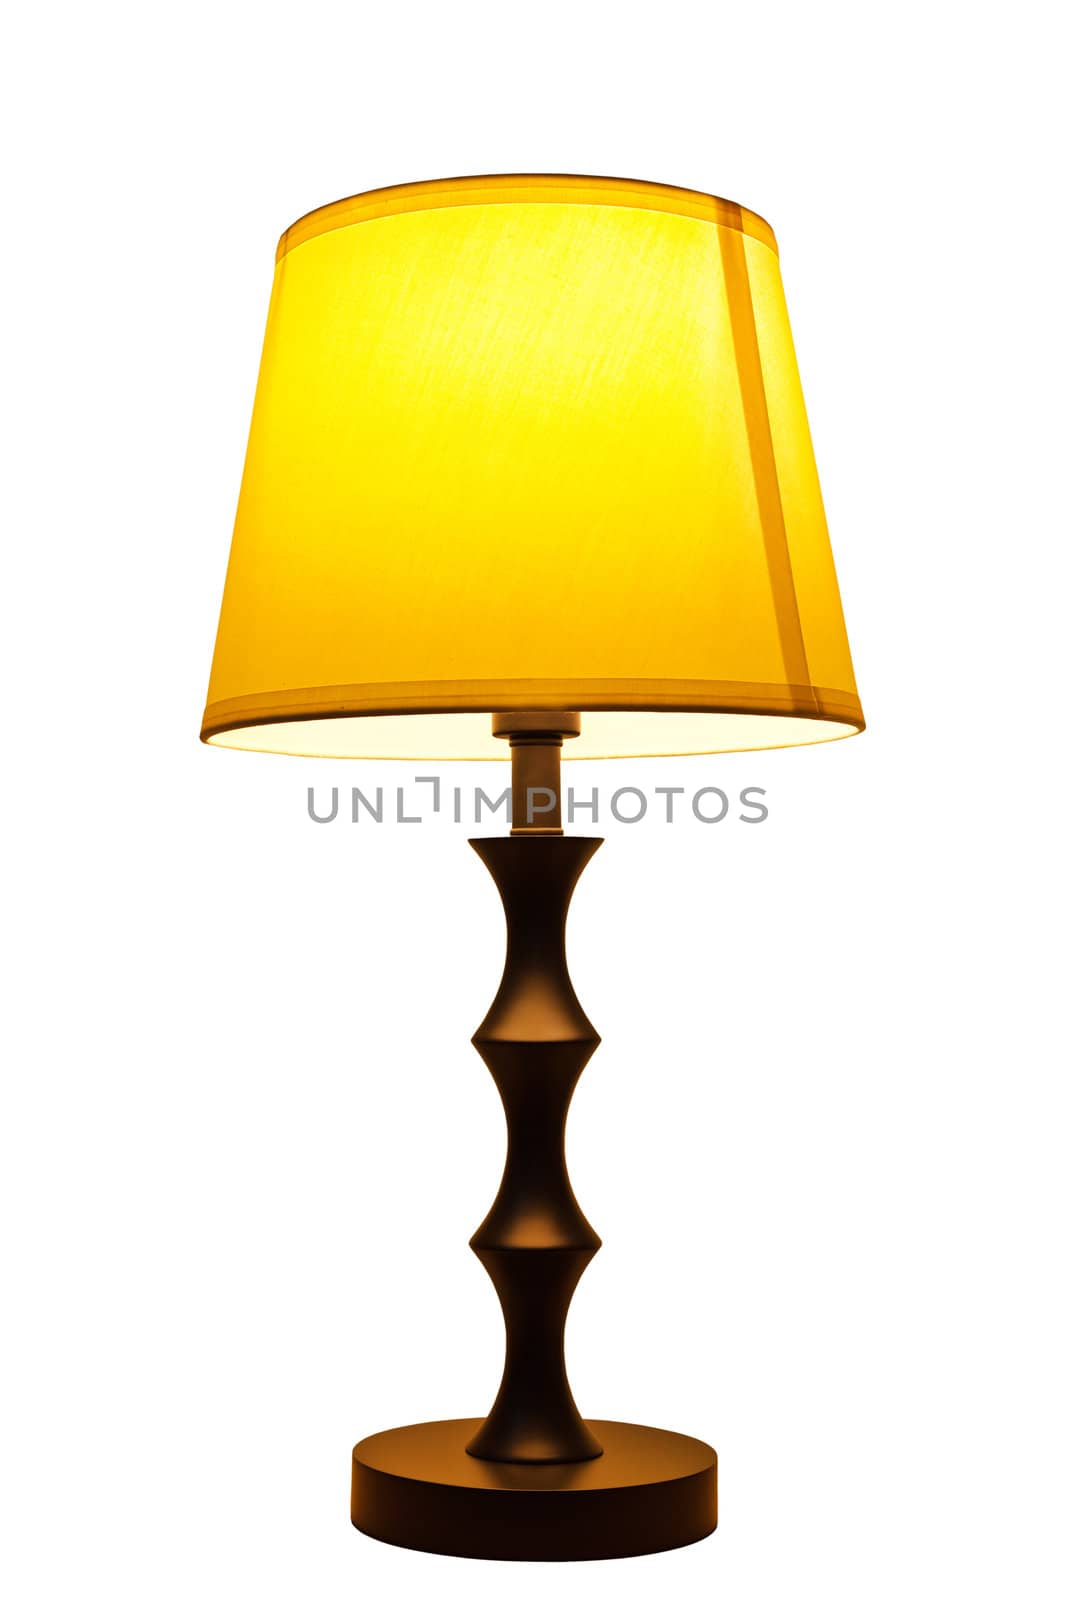 Old fashion table lamp isolated by FrameAngel